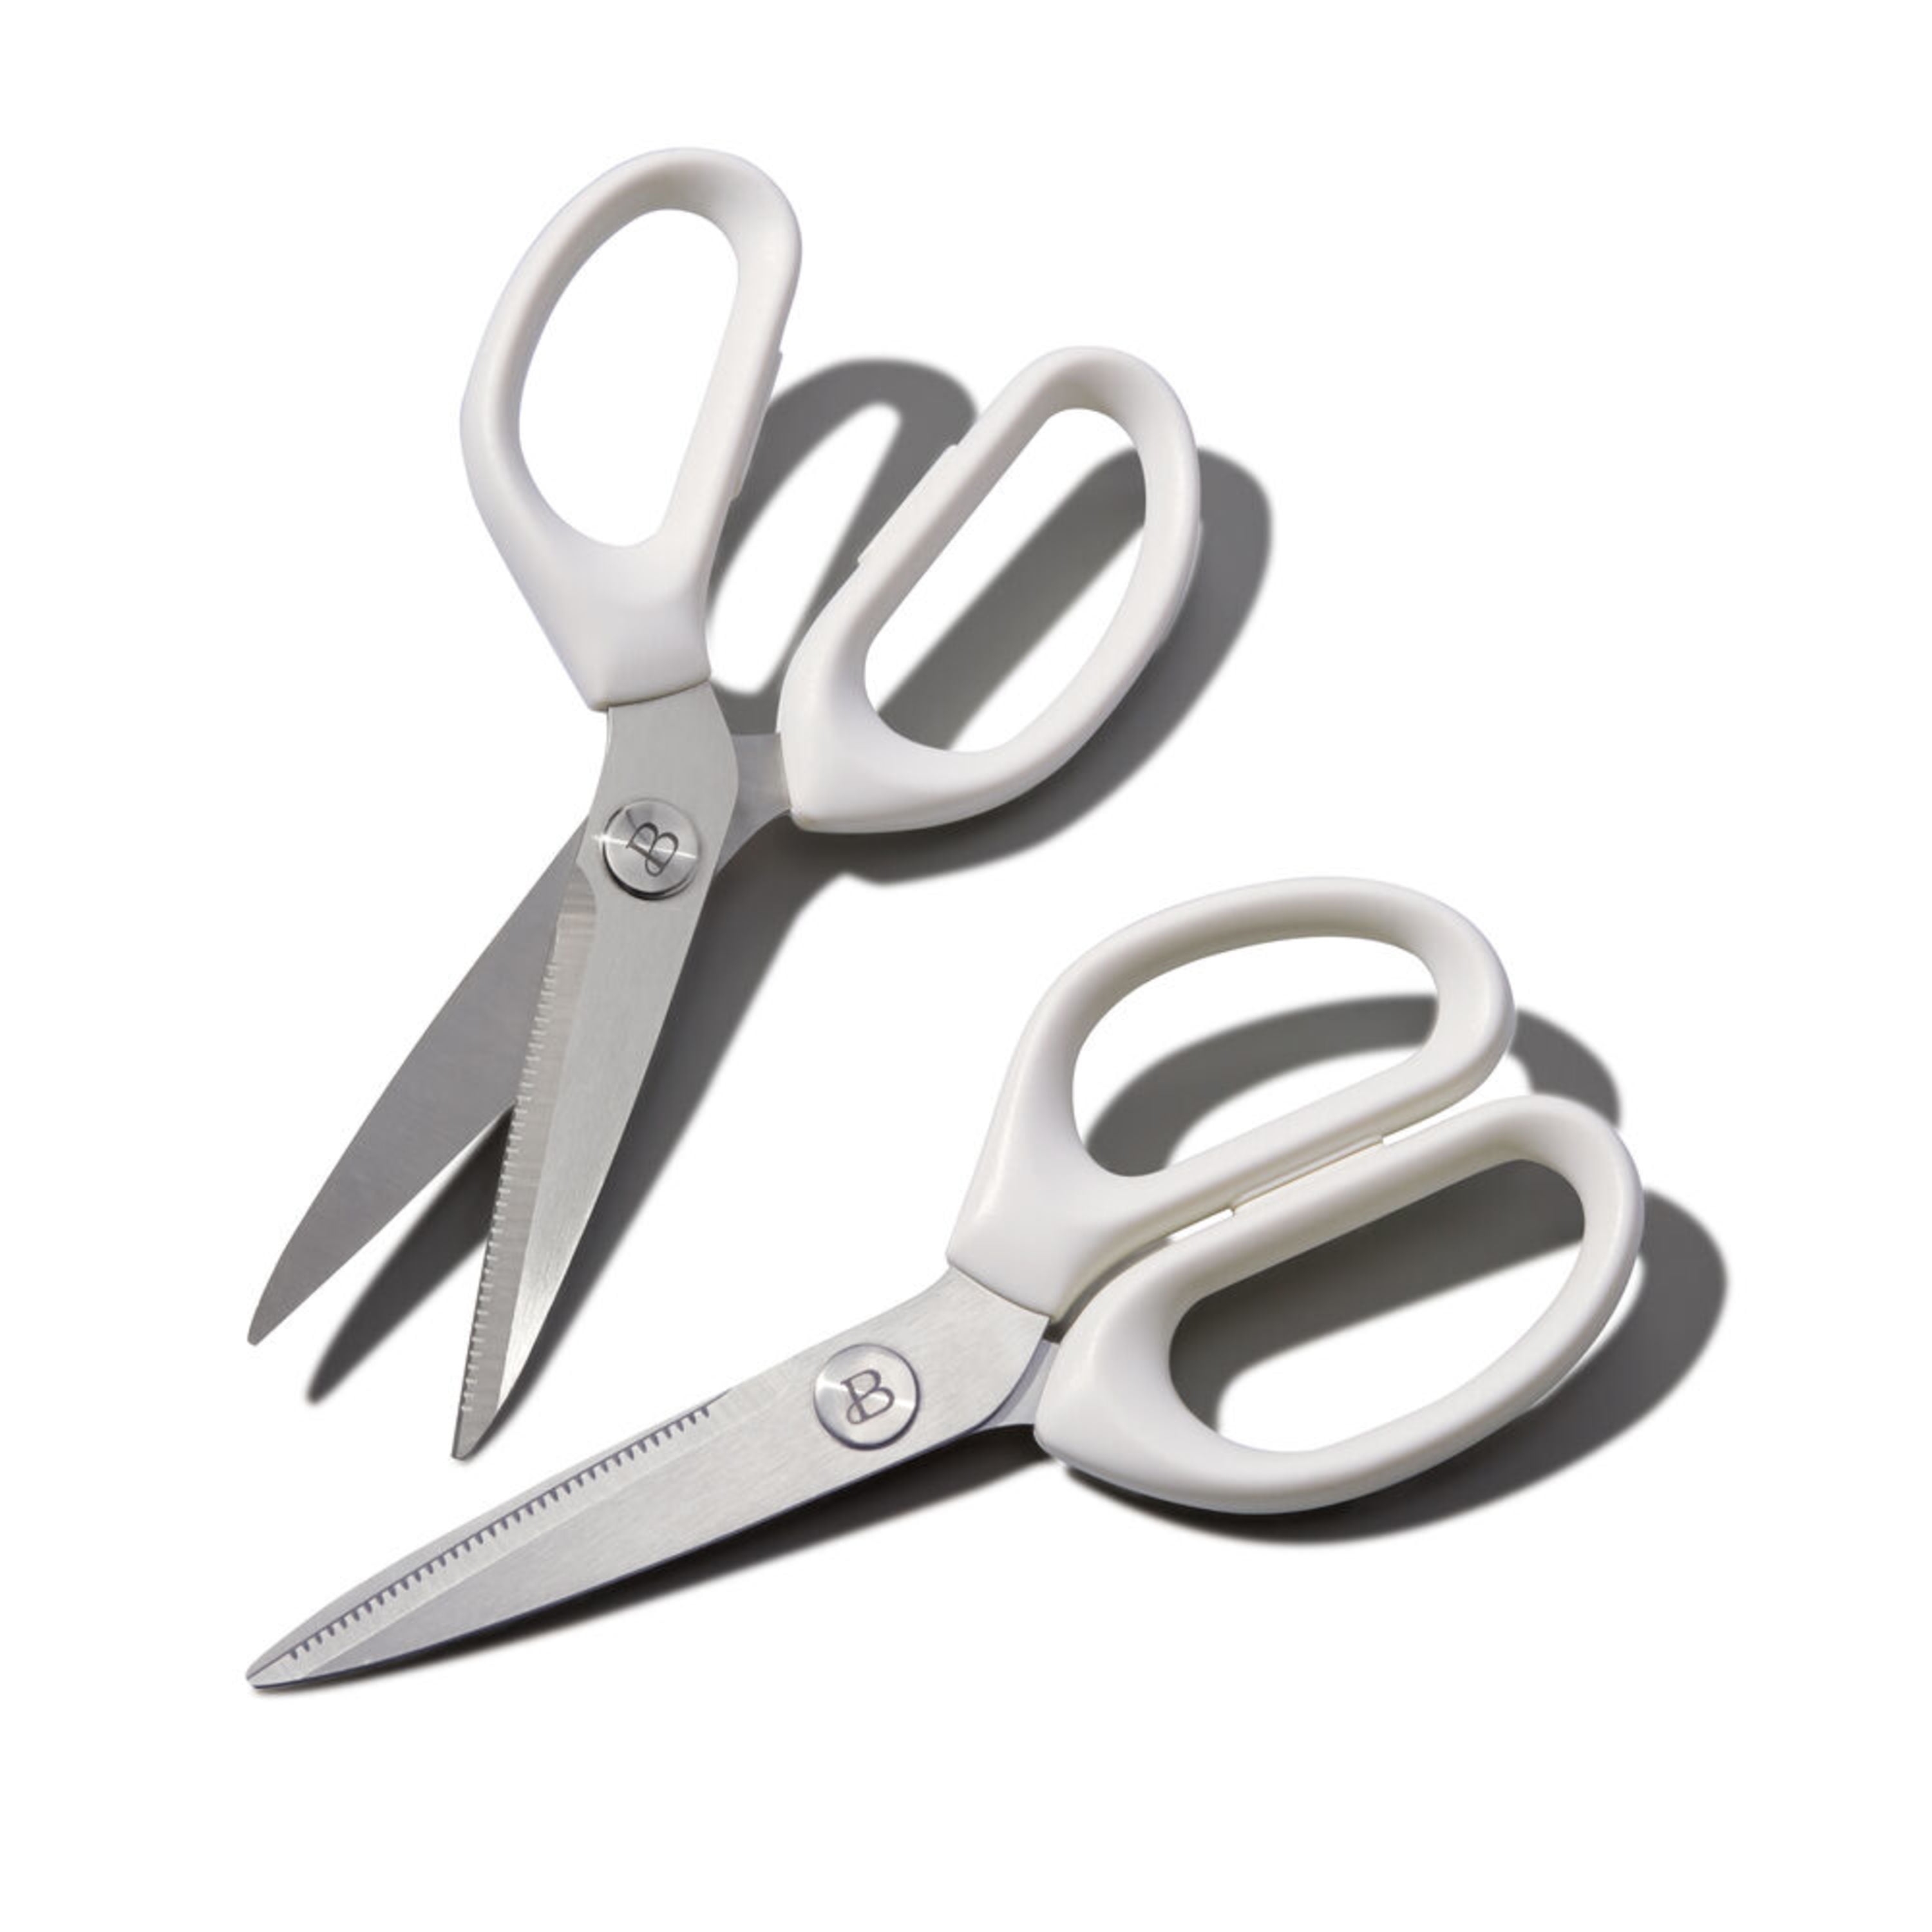 Beautiful 2-Piece All-Purpose Stainless Steel Shears in White, by Drew Barrymore